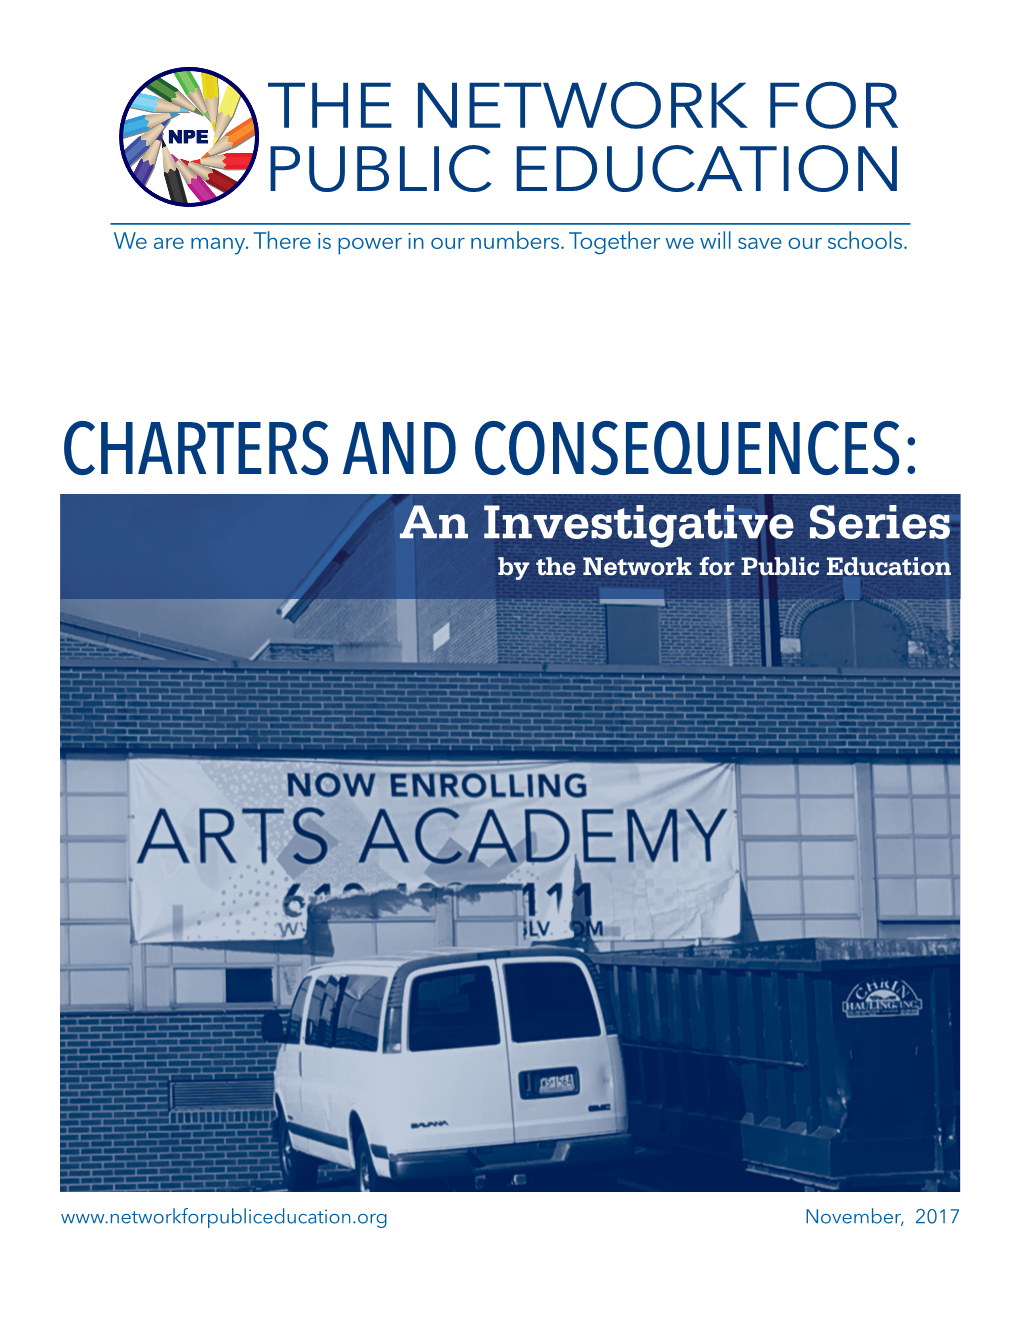 CHARTERS and CONSEQUENCES: an Investigative Series by the Network for Public Education